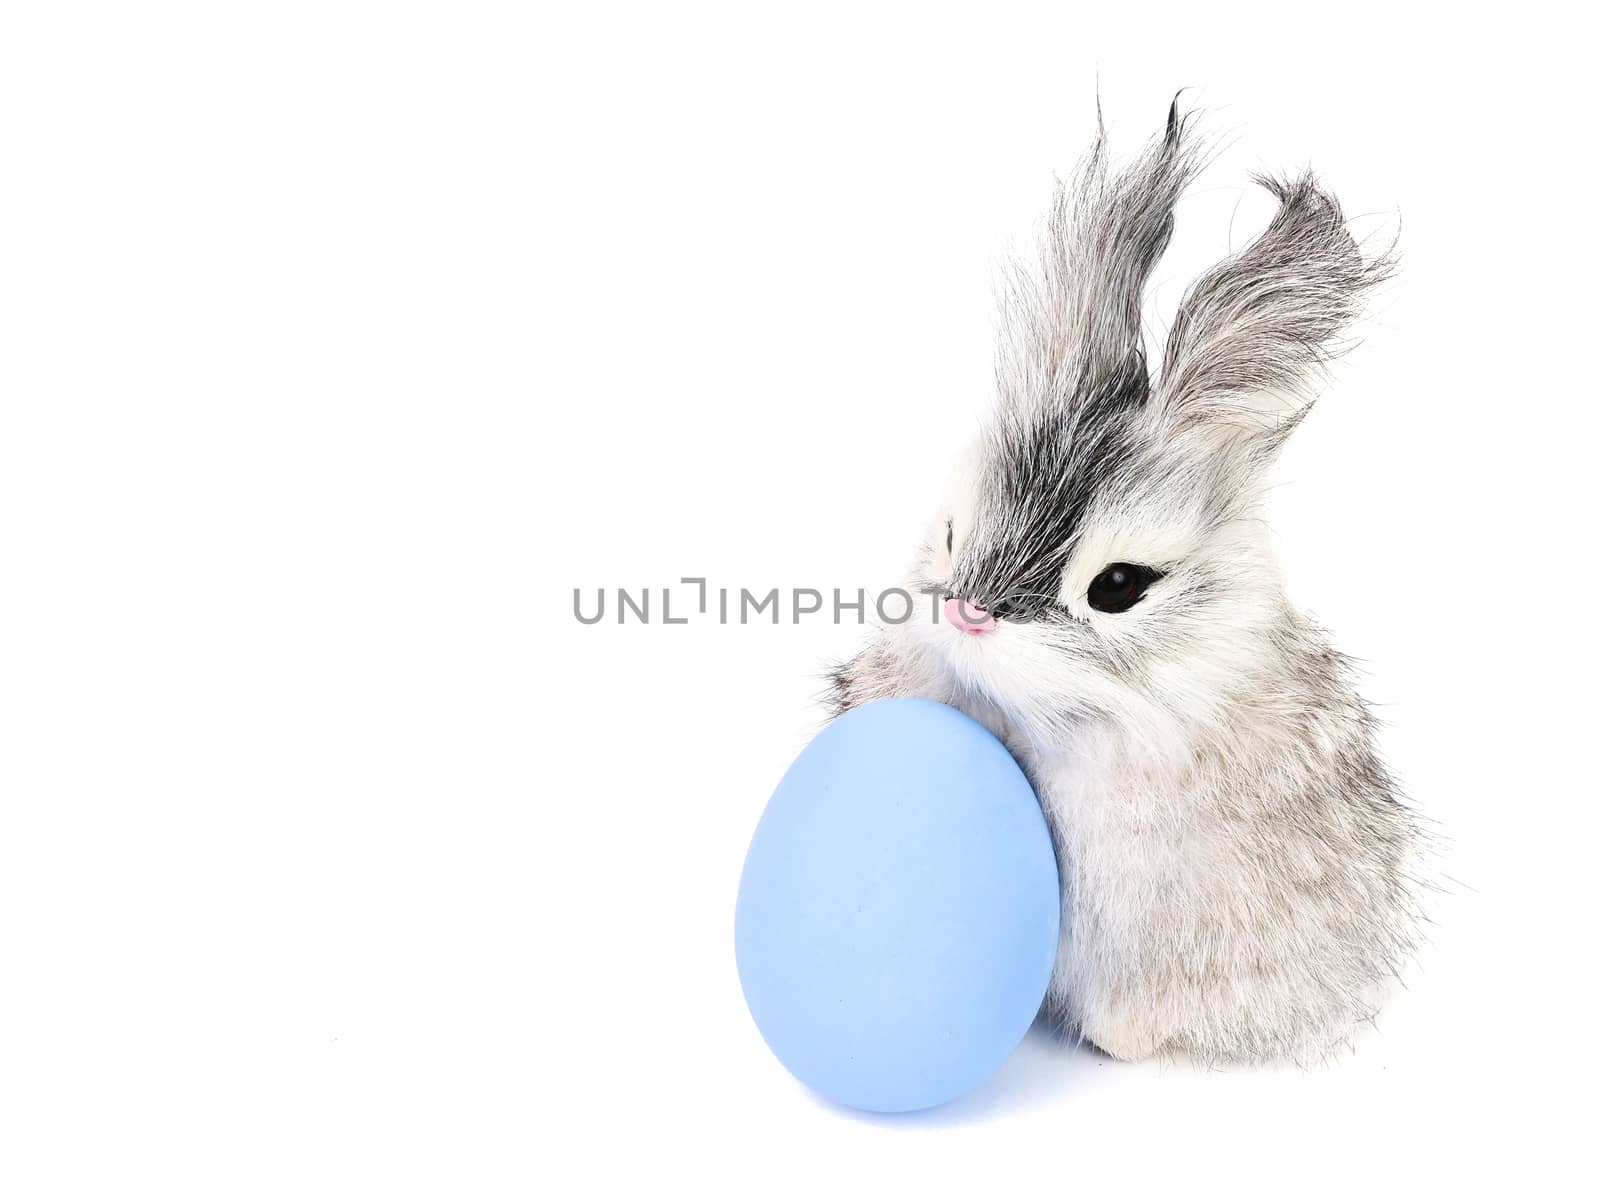 A cute little long hair bunny rabbit and bright colored easter egg, isolated on white background.